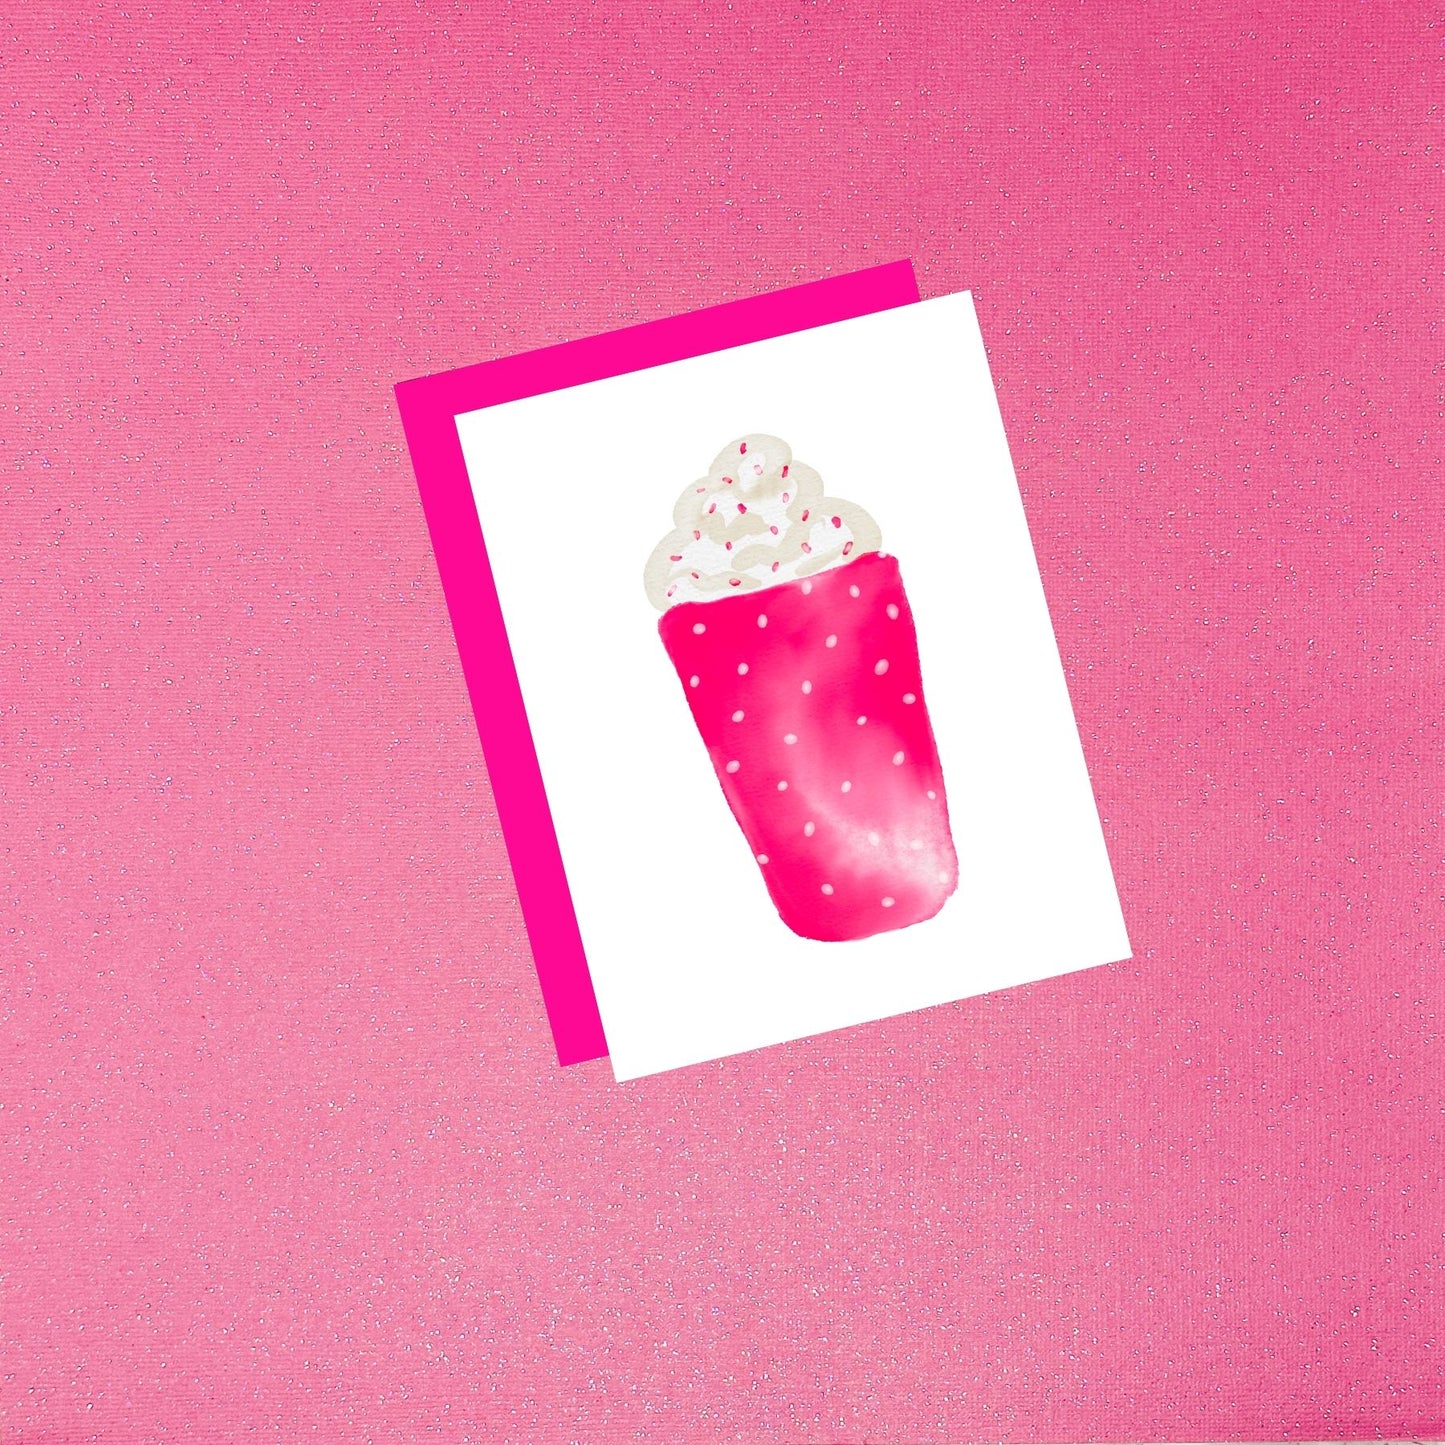 Holiday - Joyful Pink Coffee Cup with White Dots | Watercolor Holiday Card